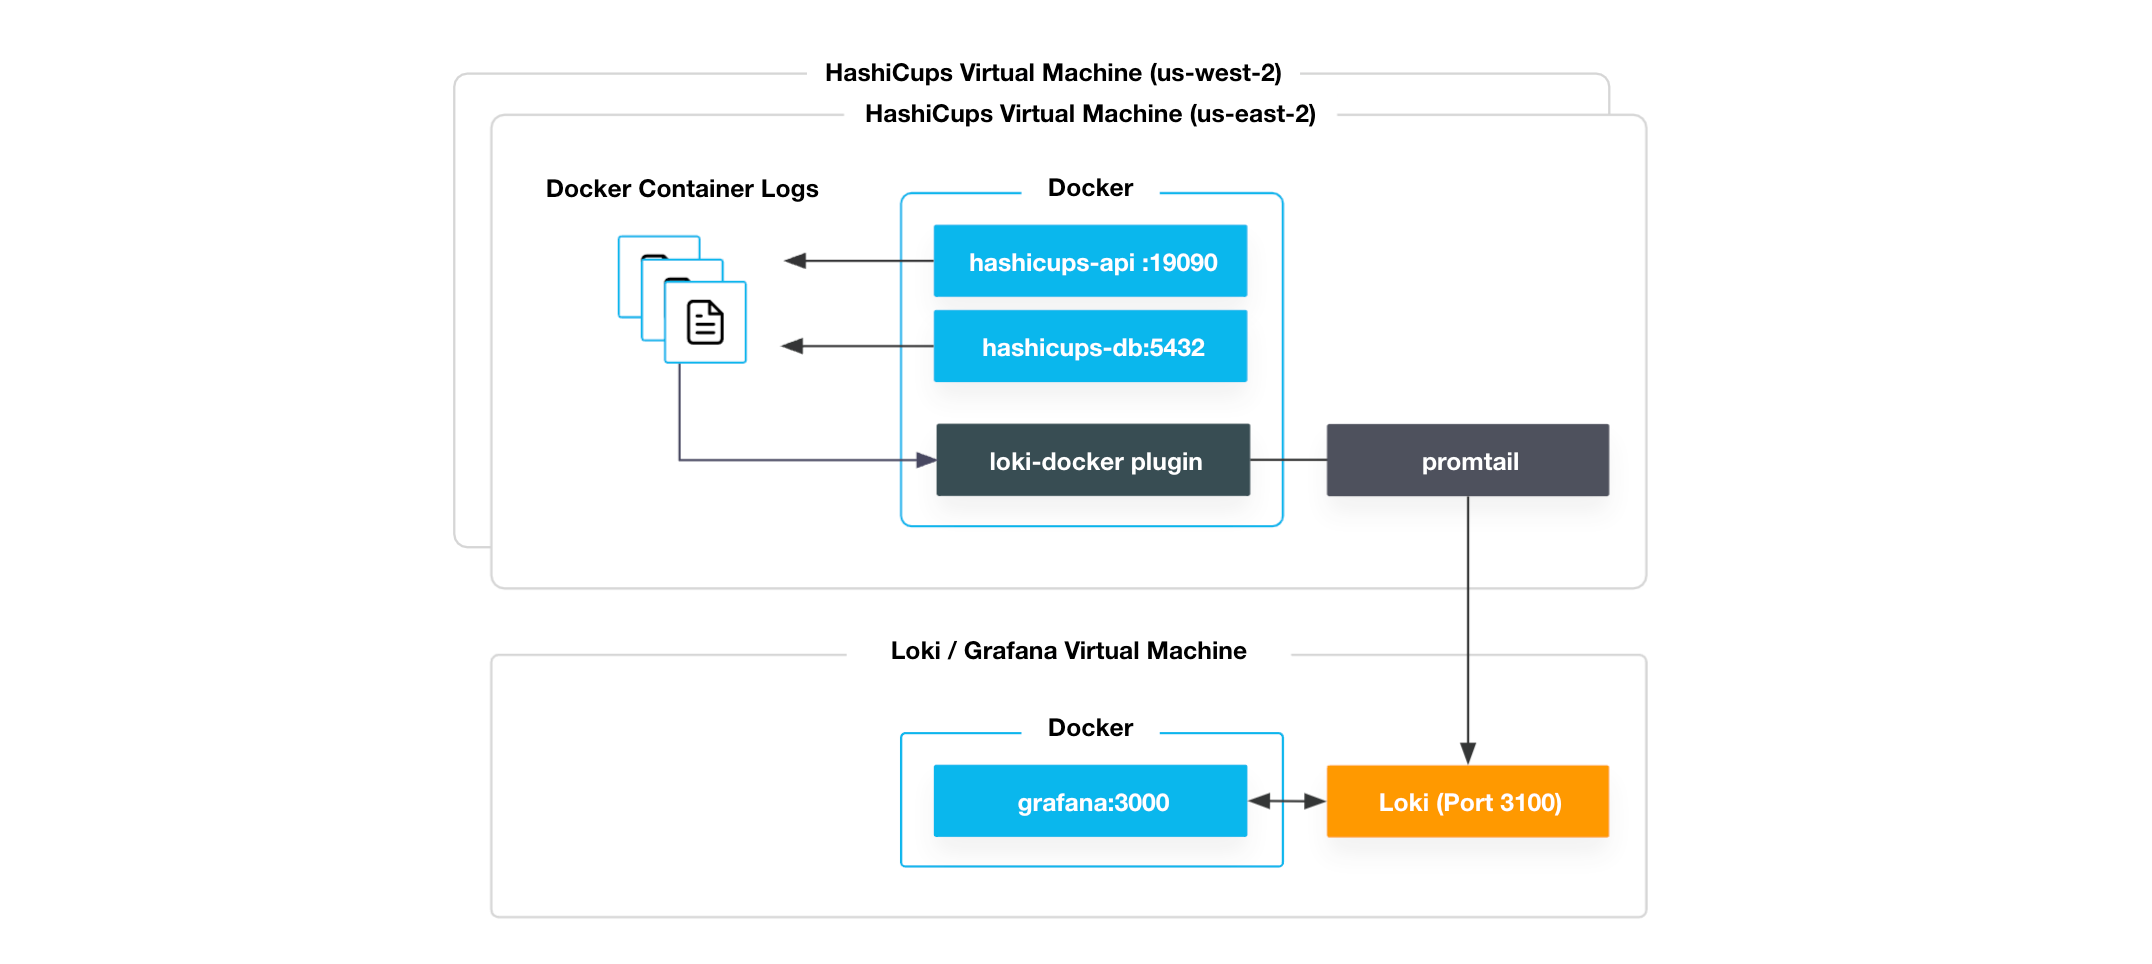 Diagram showing interactions between components on the HashiCups and Loki EC2 instances